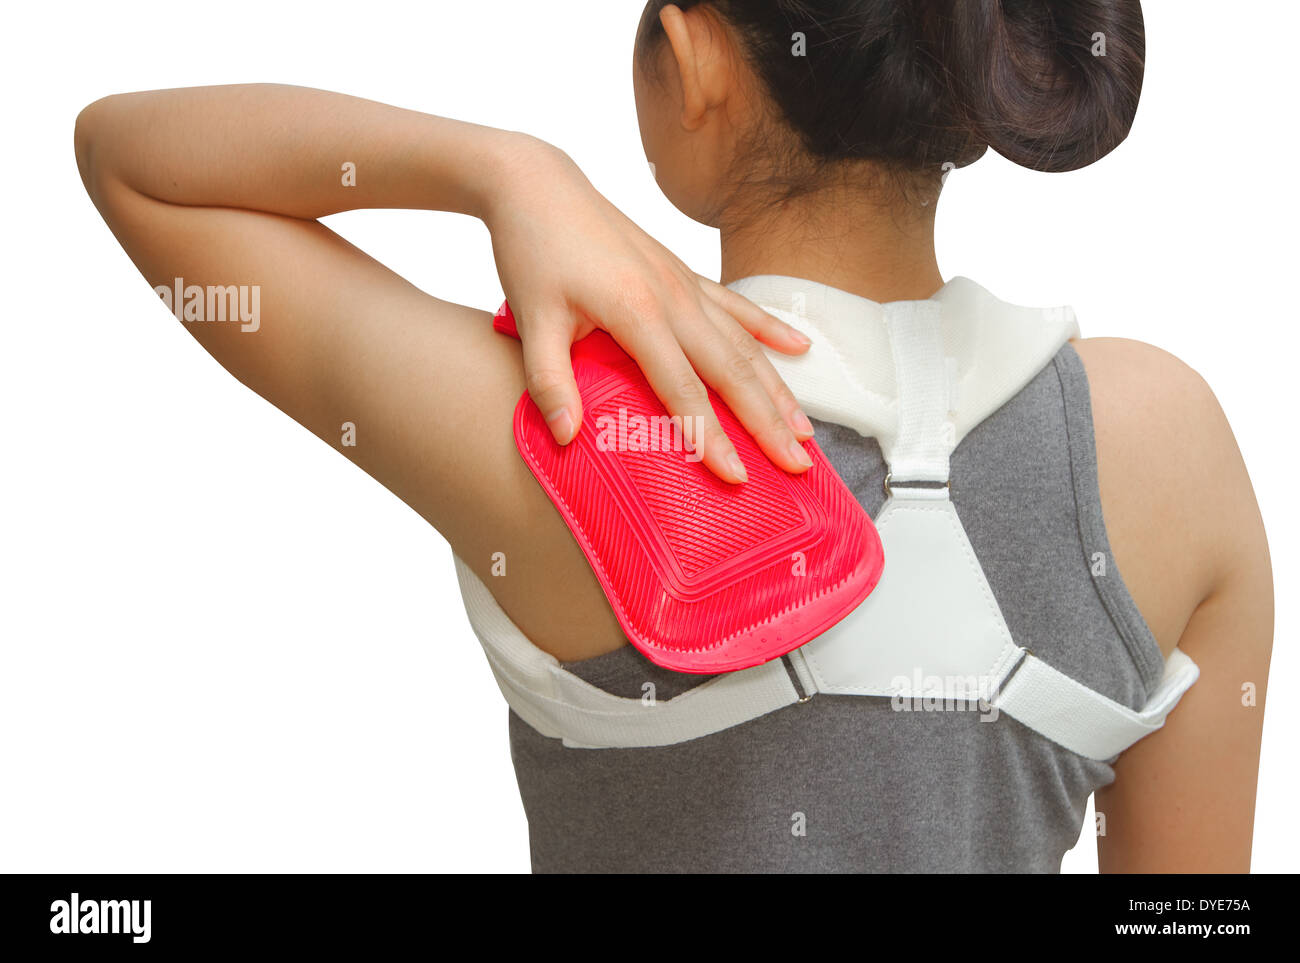 woman putting a hot pack on her shoulder pain Stock Photo